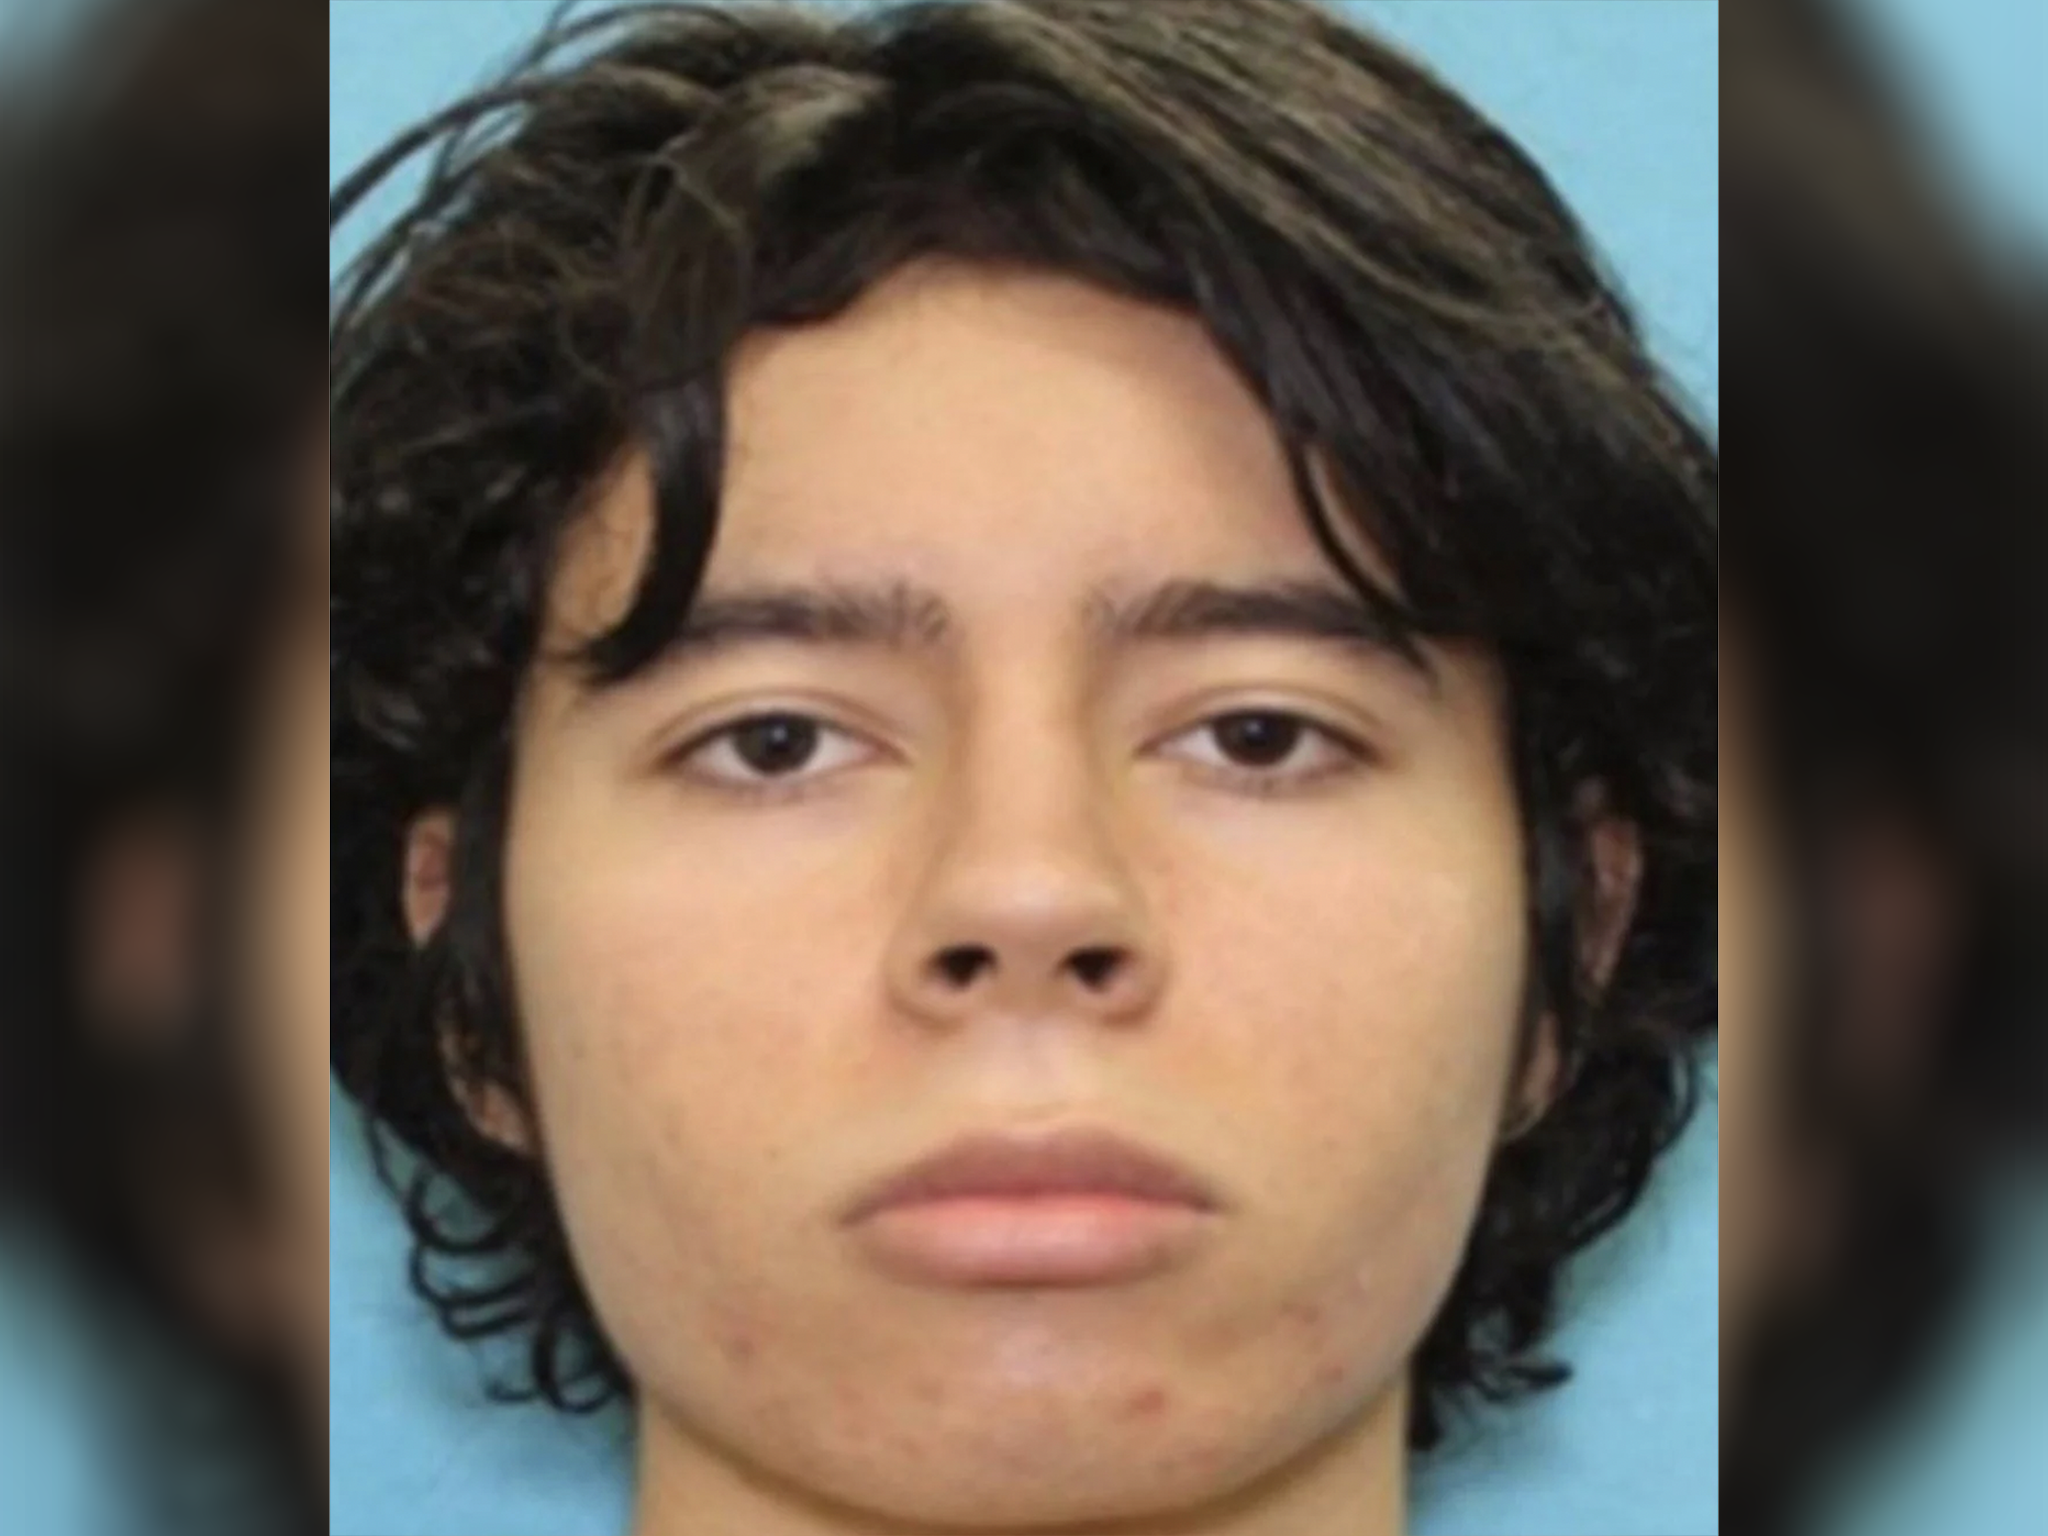 Eighteen-year-old suspect Salvador Ramos reportedly bought two rifles legally just days before Uvalde attack